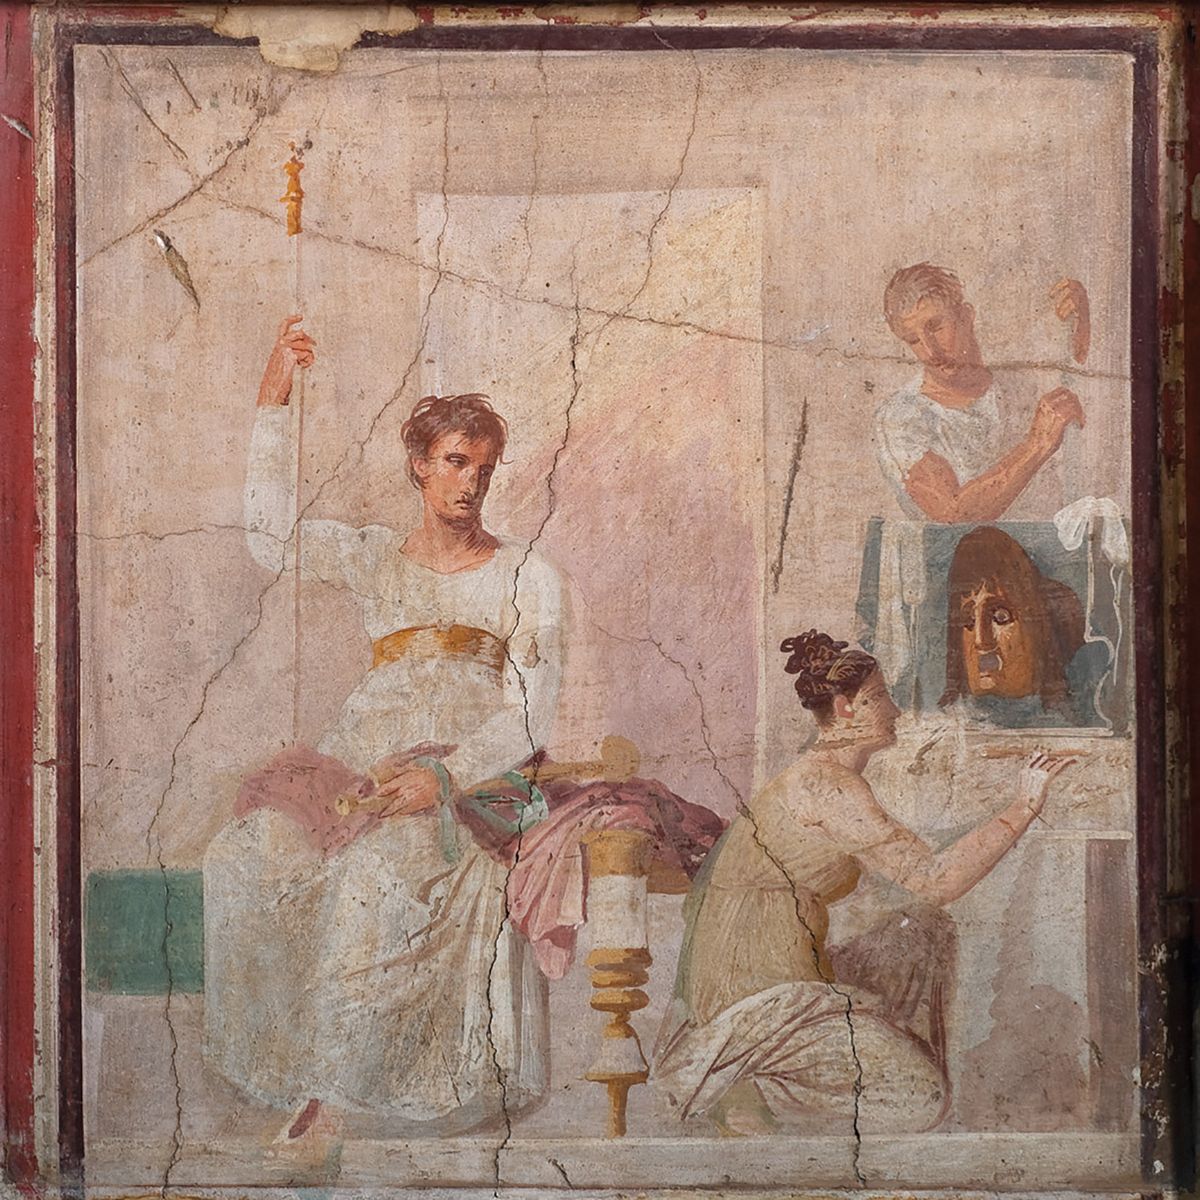 A fresco from Herculaneum (AD30-AD40) of an actor dressed as king, and female figure with a small painting of a mask Museo Archeologico Nazionale di Napoli